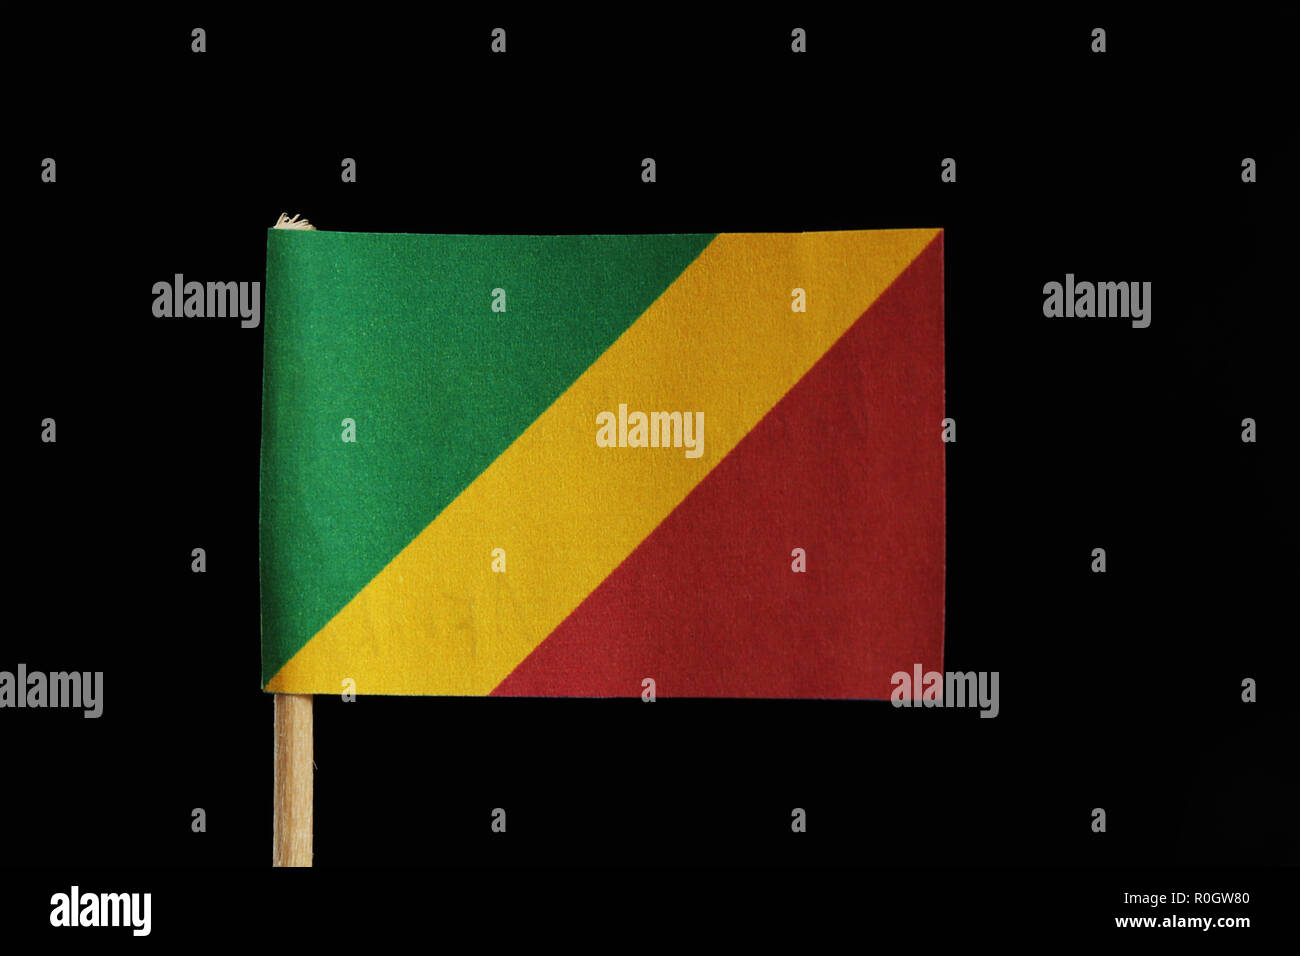 A national flag of the Republic of the Congo on toothpick on black background. Consists of a diagonal tricolour of green, yellow and red radiating fro Stock Photo